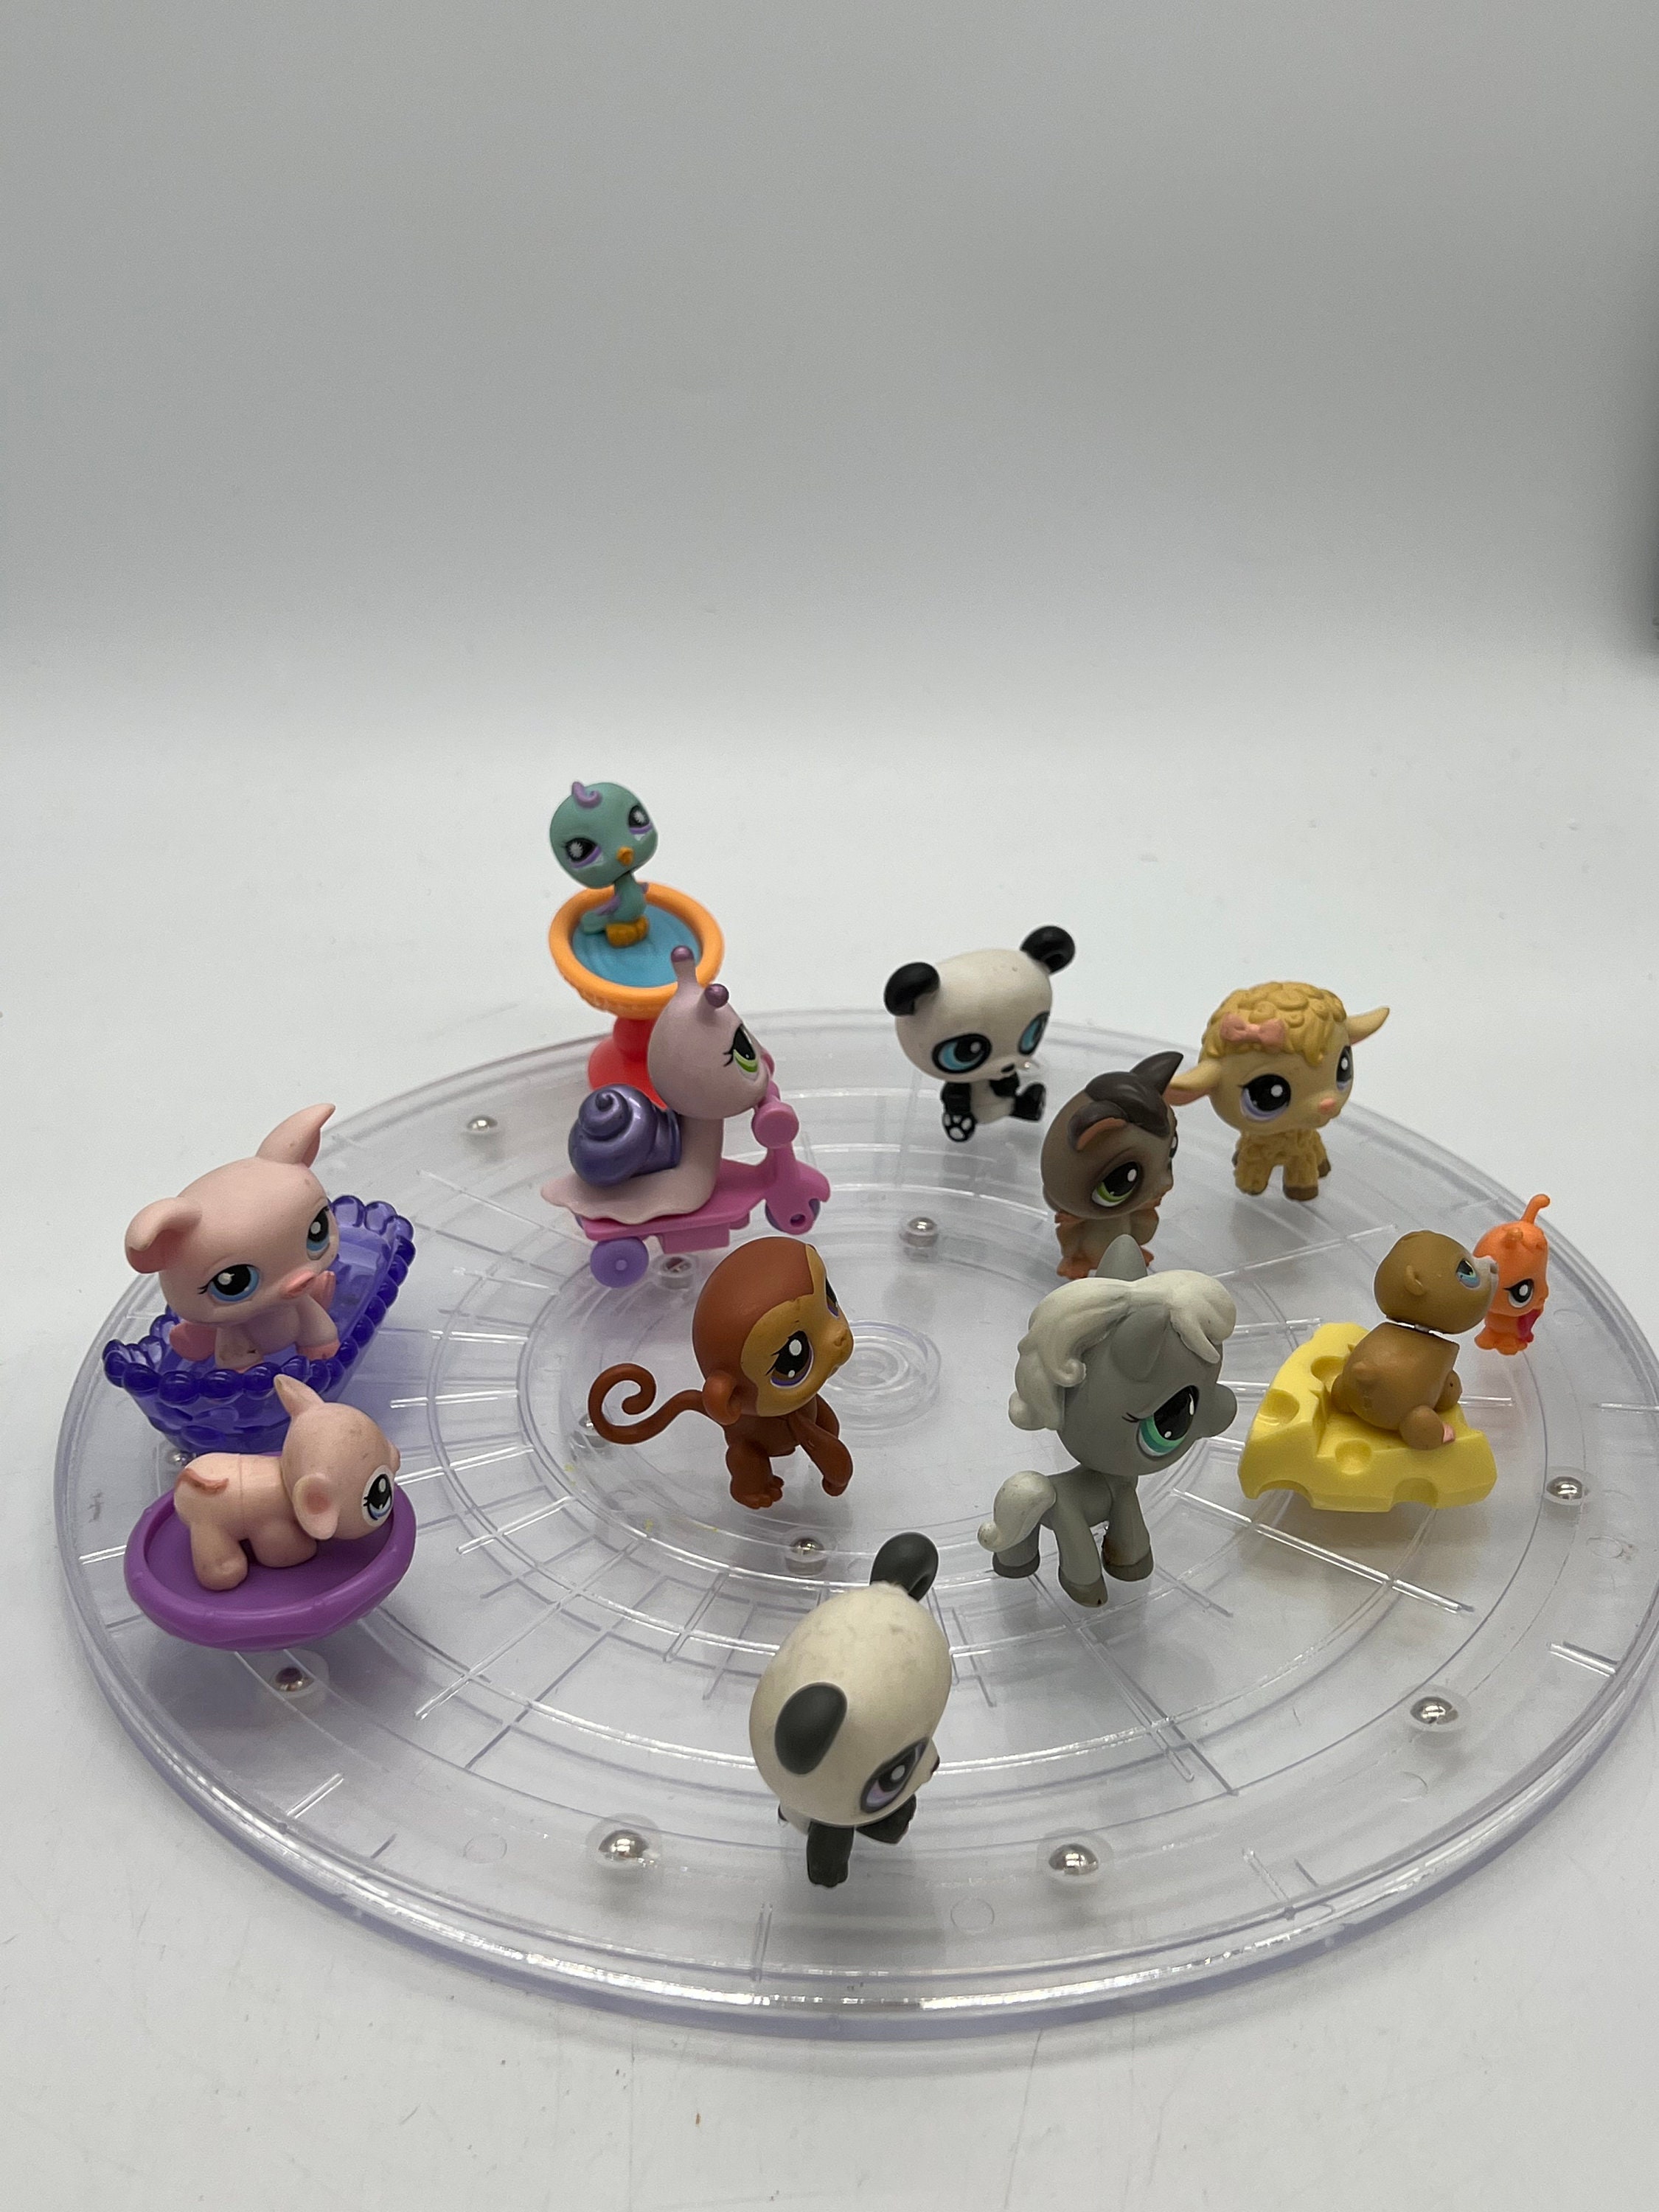 5 Animalsauthentic Littlest Pet Shop Blind Bag 5 Animals Included No  Doubles Dogs, Cats, Frogs, Fish, Mice, Monkeys, Horses, Turtles 